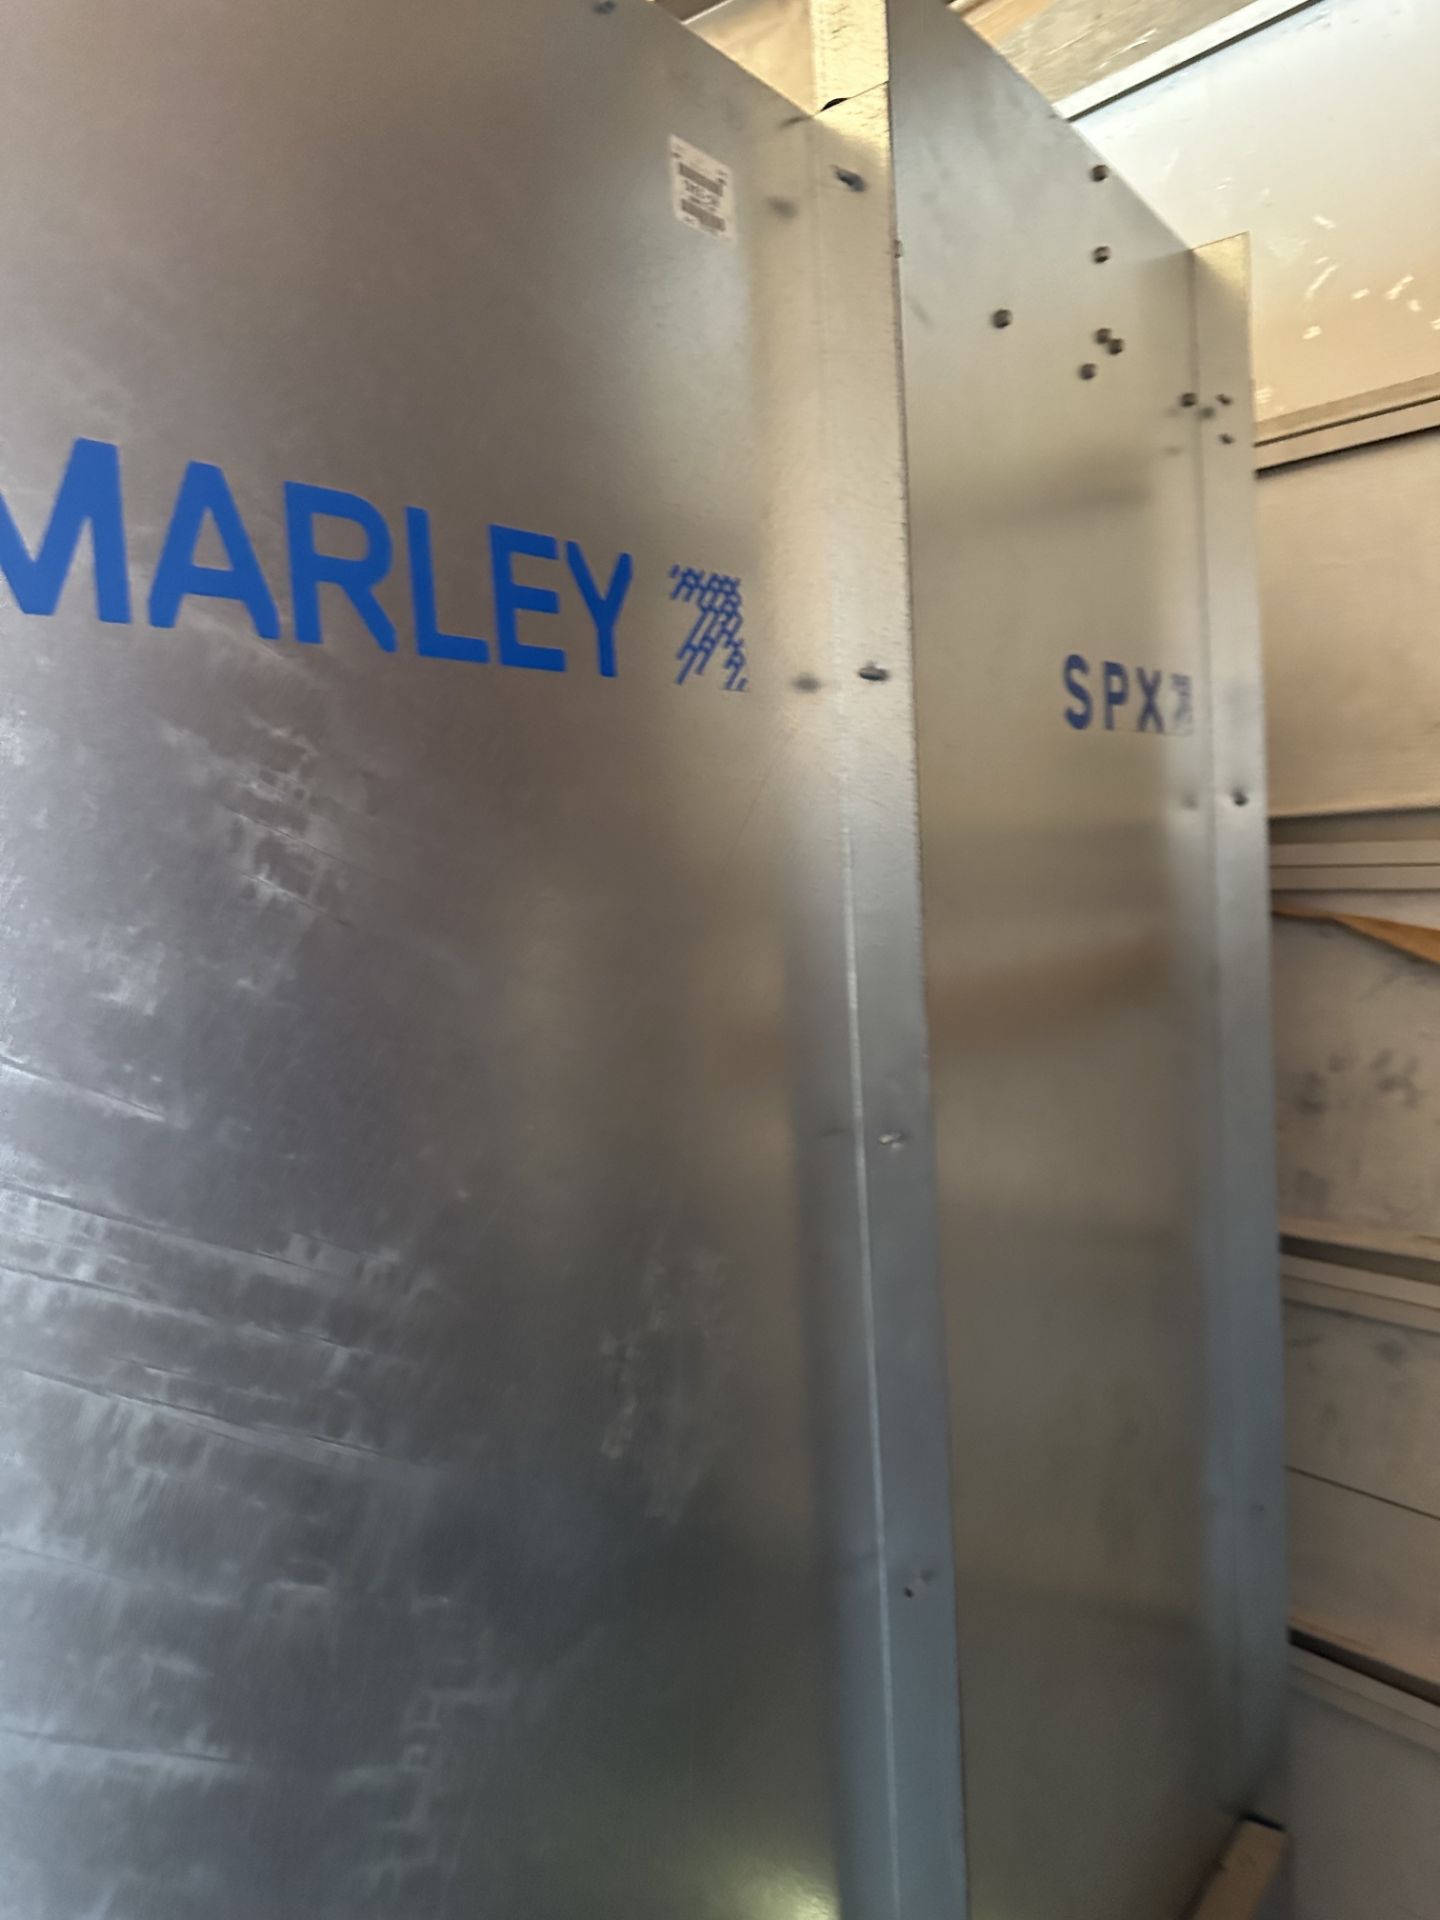 Used SPX Flow Marley Aqua Tower Cooling tower. Model XXX - Image 3 of 4